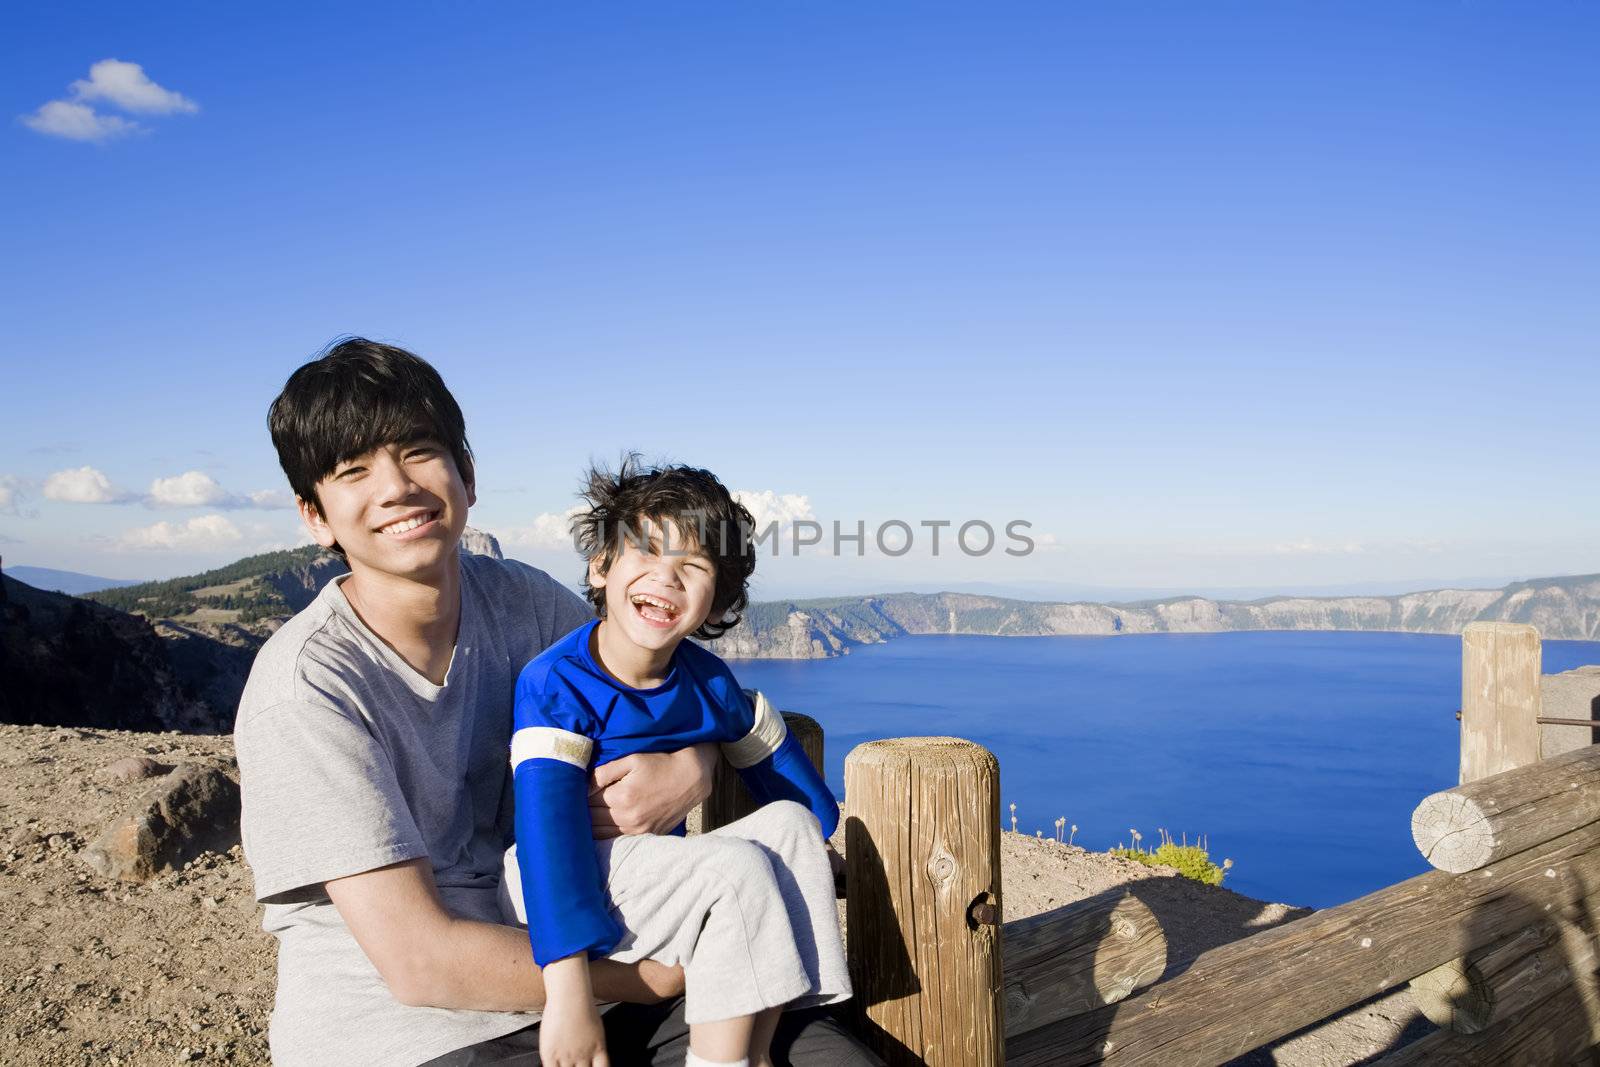 Big brother holding smiling disabled little boy with Oregon's famous Crater Lake in the bakcground. Child has cerebral palsy